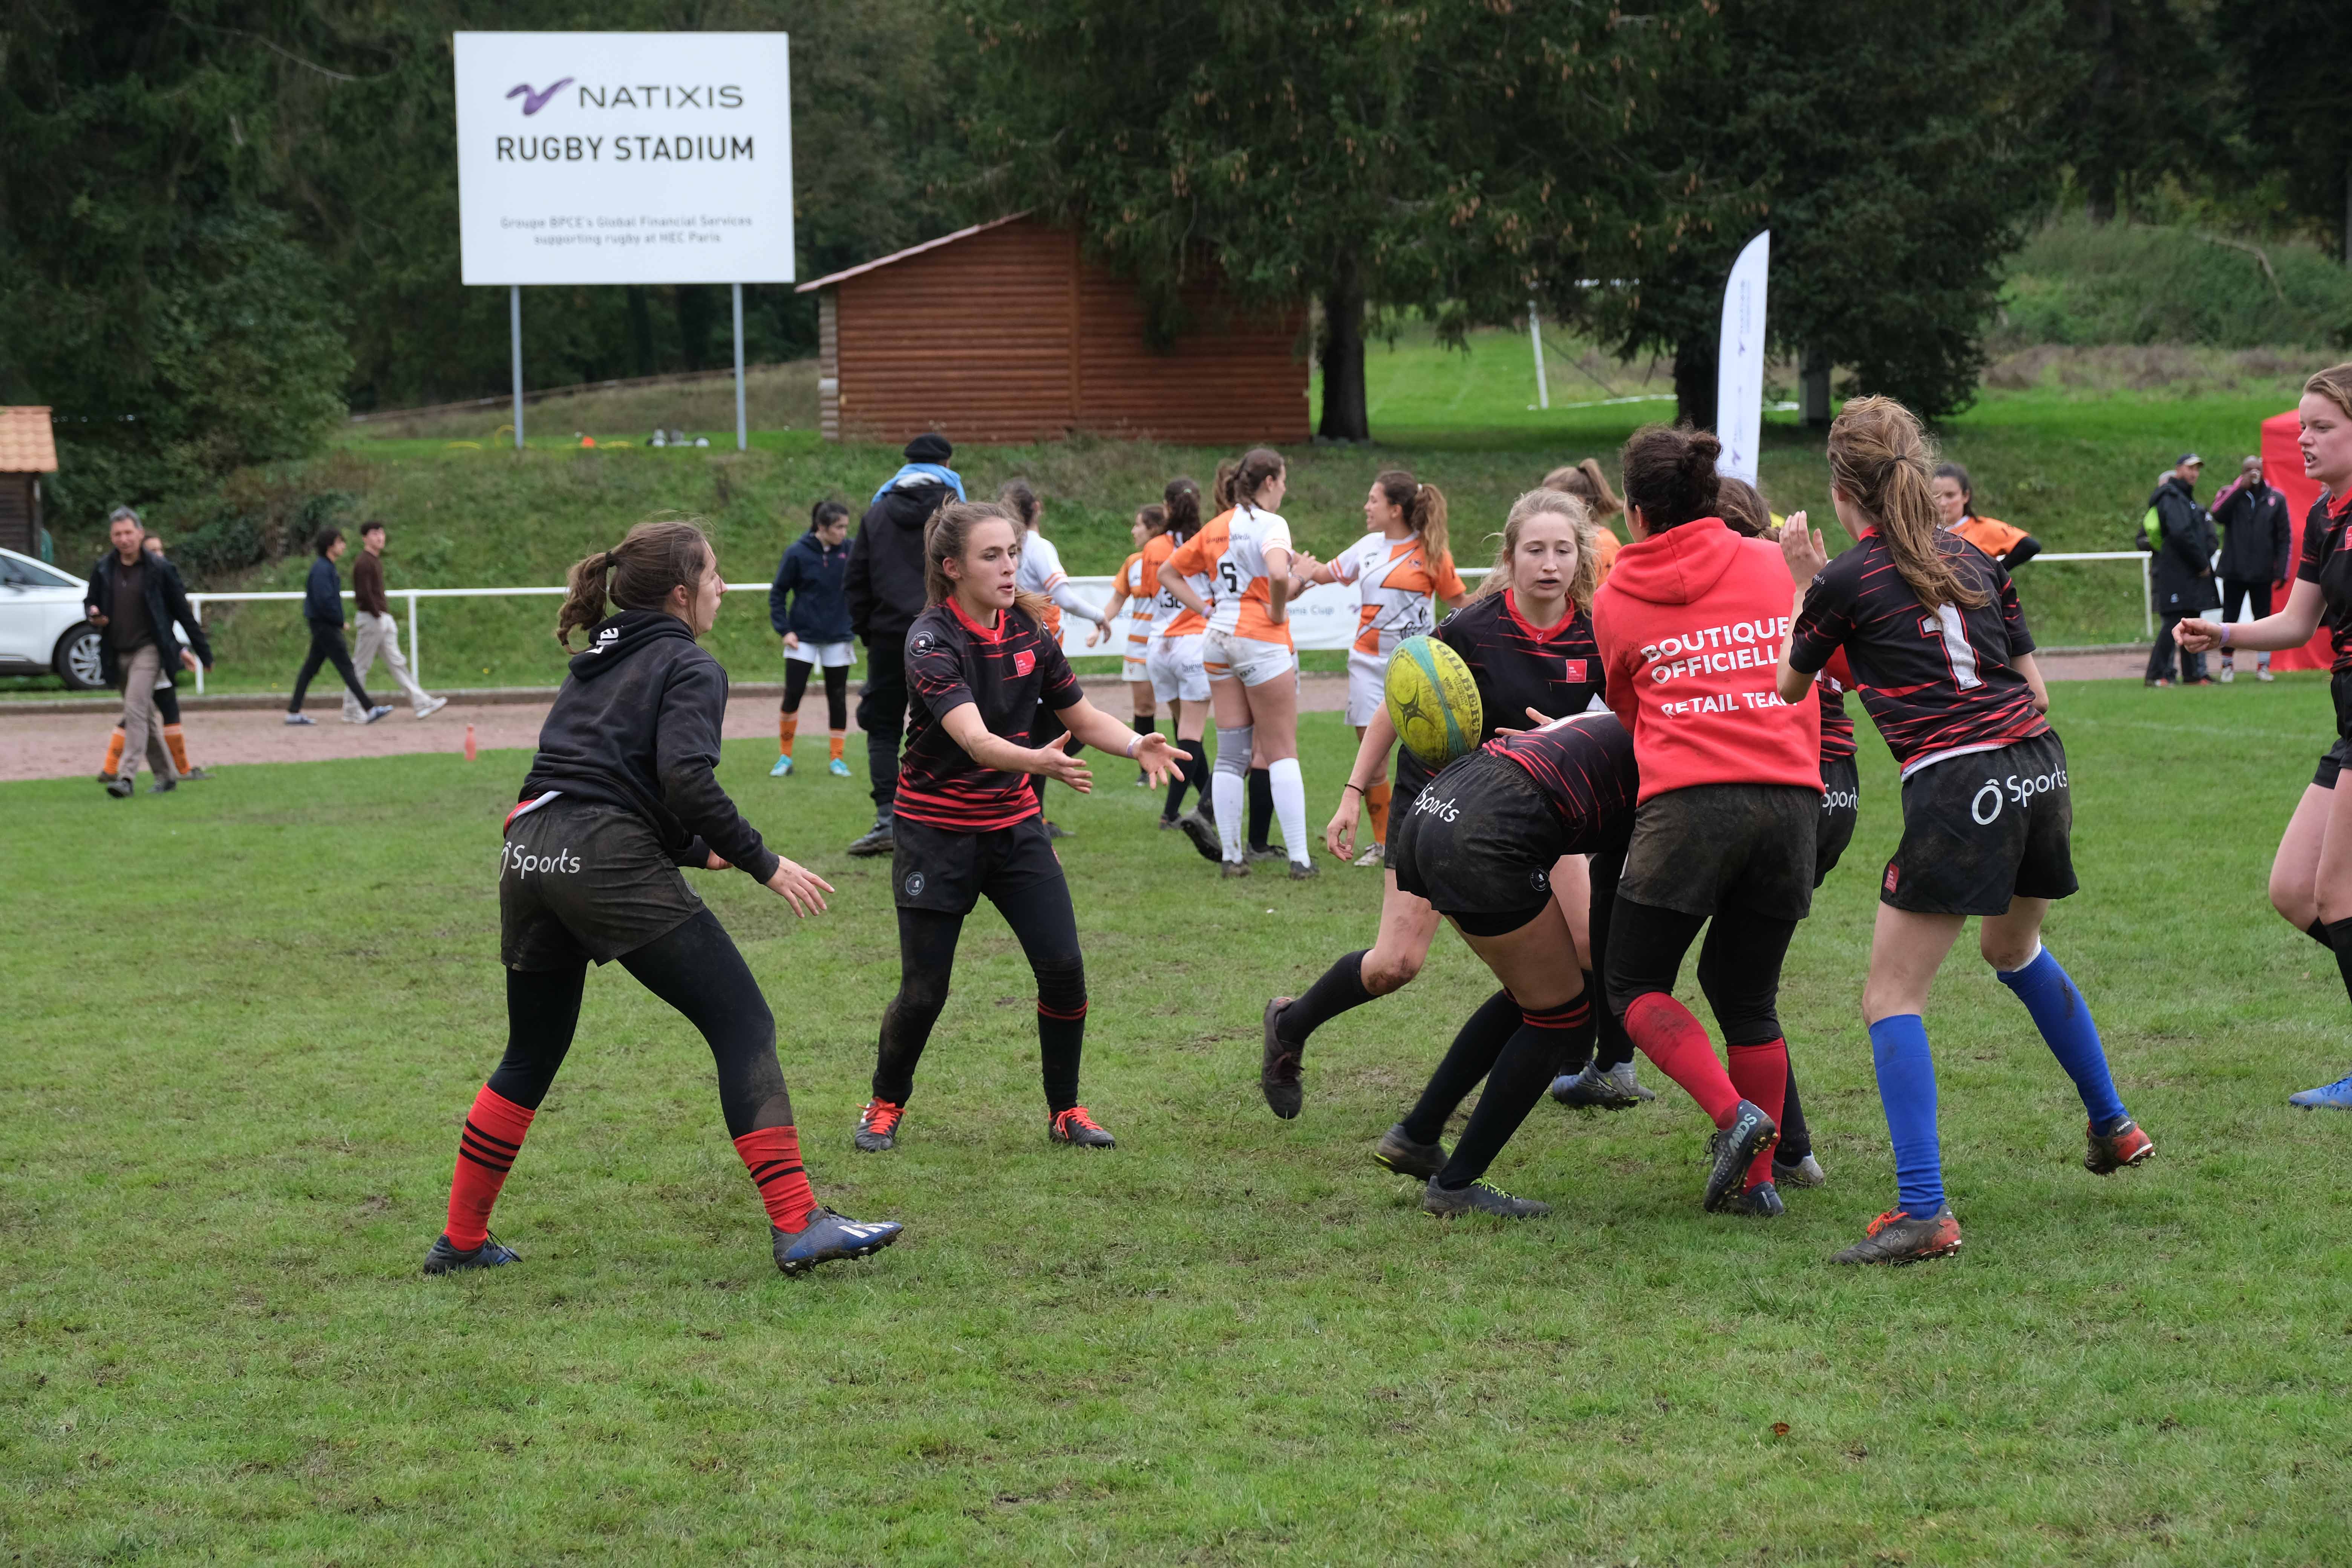 HEC female students playing rugby on Campus